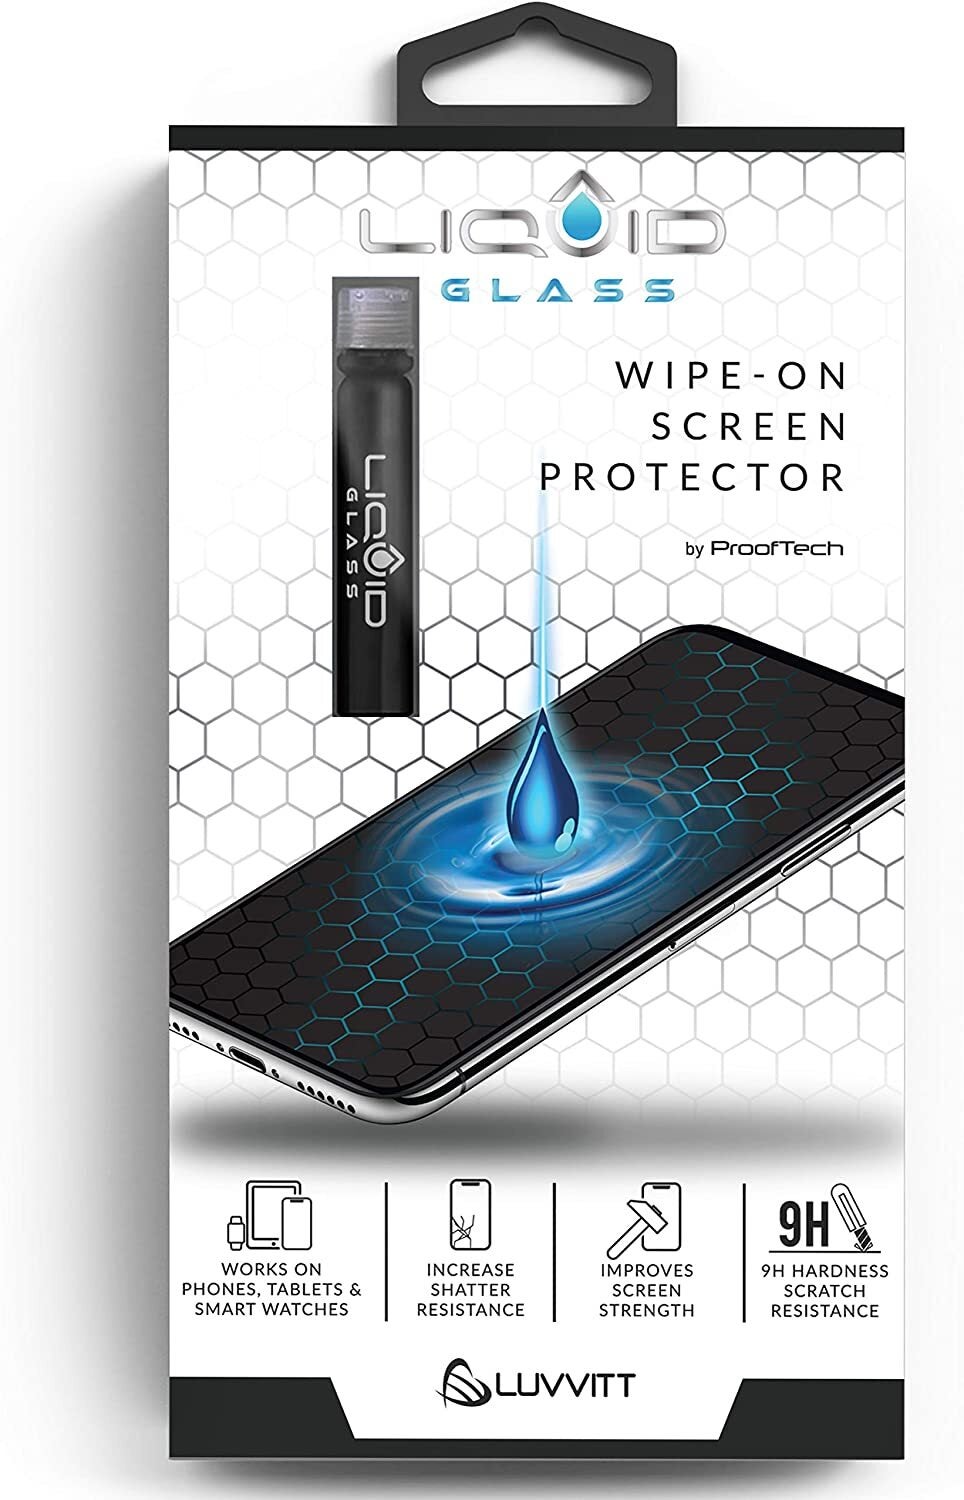 The best Galaxy A53 screen protectors you can get